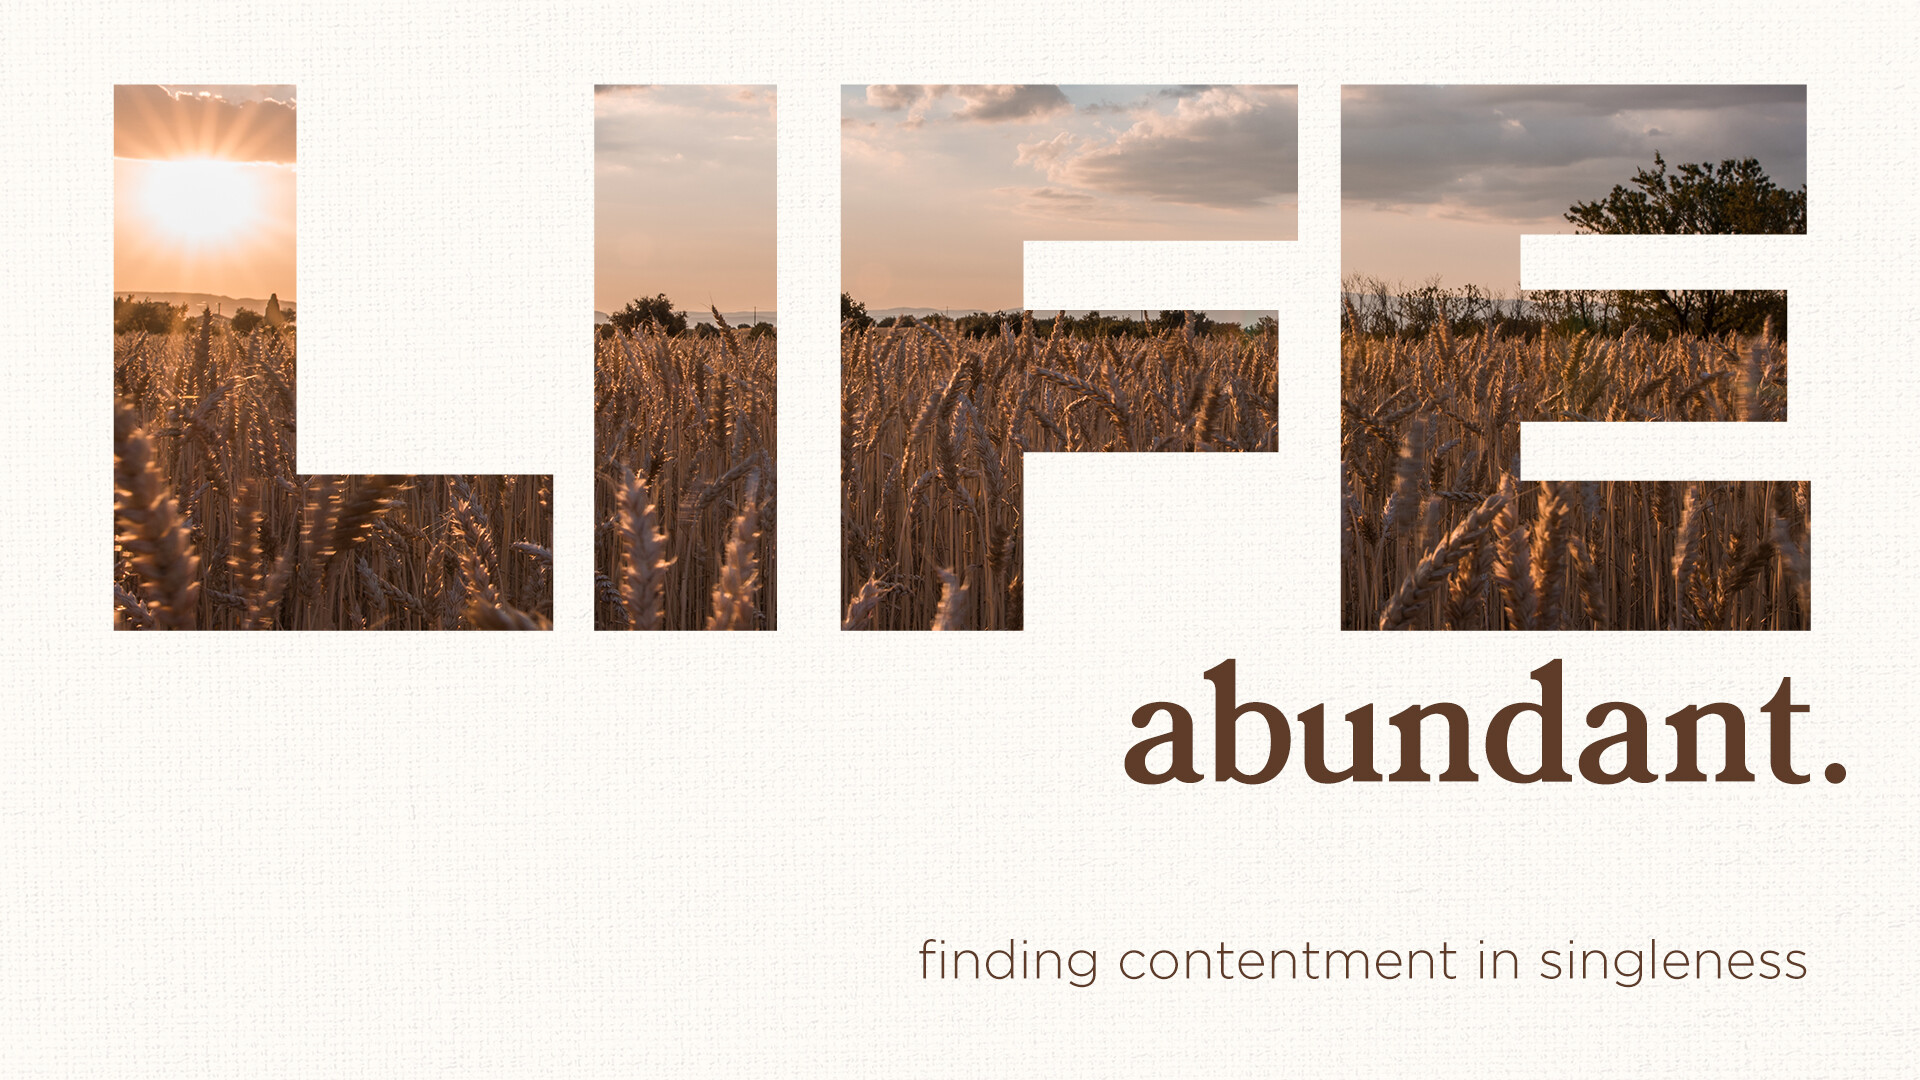 Life Abundantly. Finding Contentment in Singleness